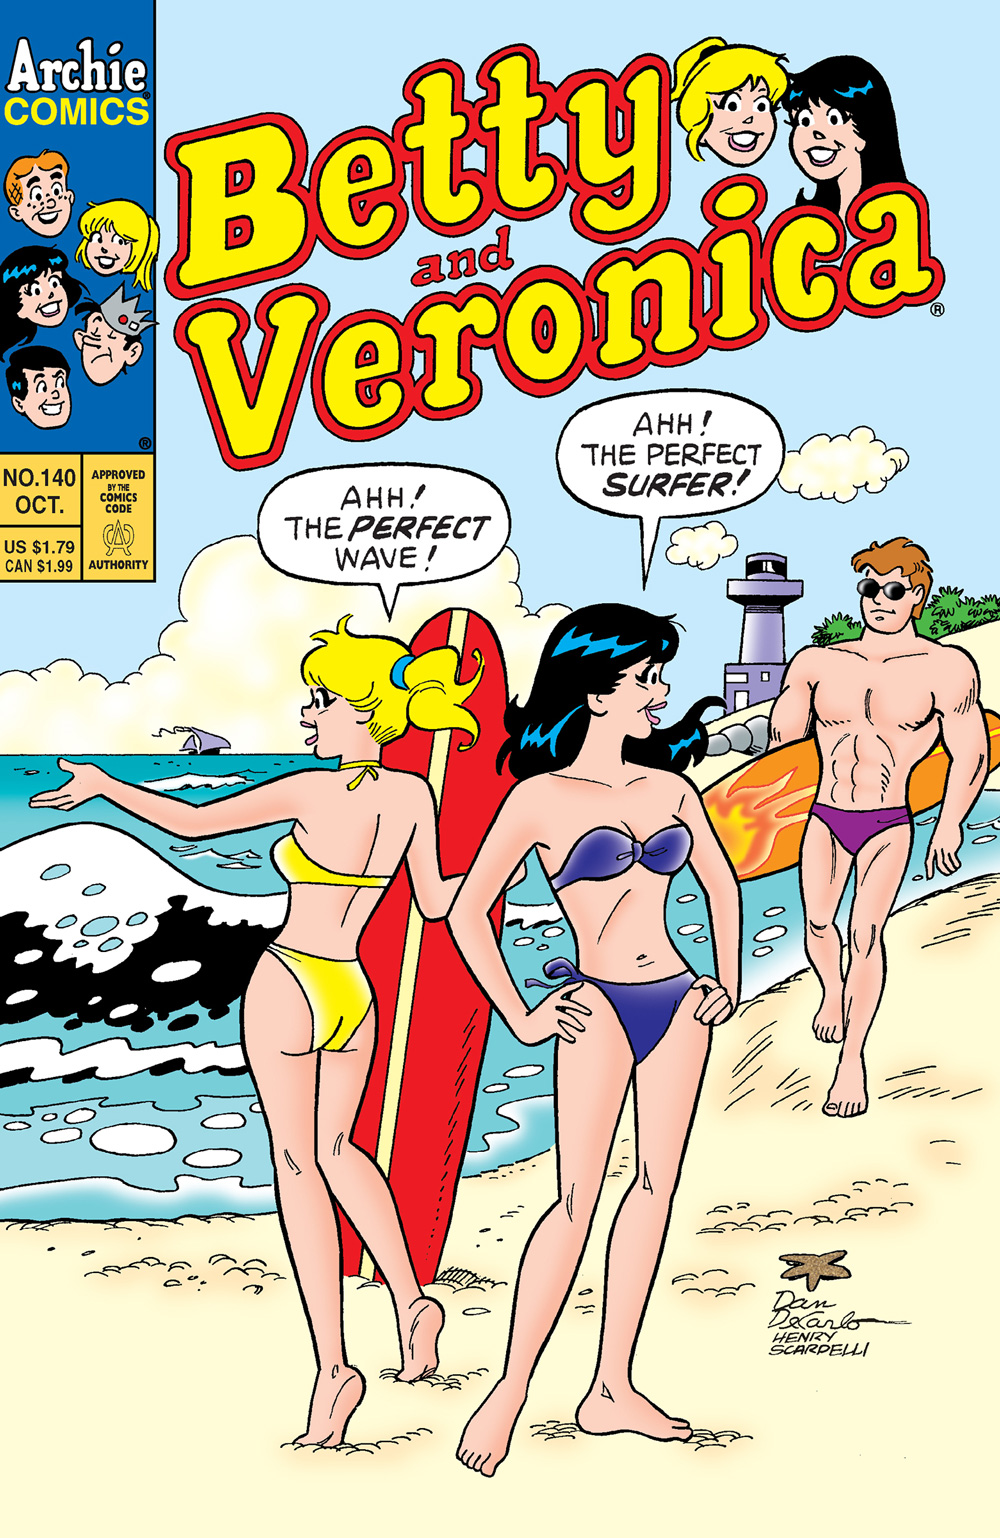 Betty and Veronica are on the beach while an unknown surfer walks towards them. Betty says she sees the perfect wave, and Veronica says she sees the perfect surfer.